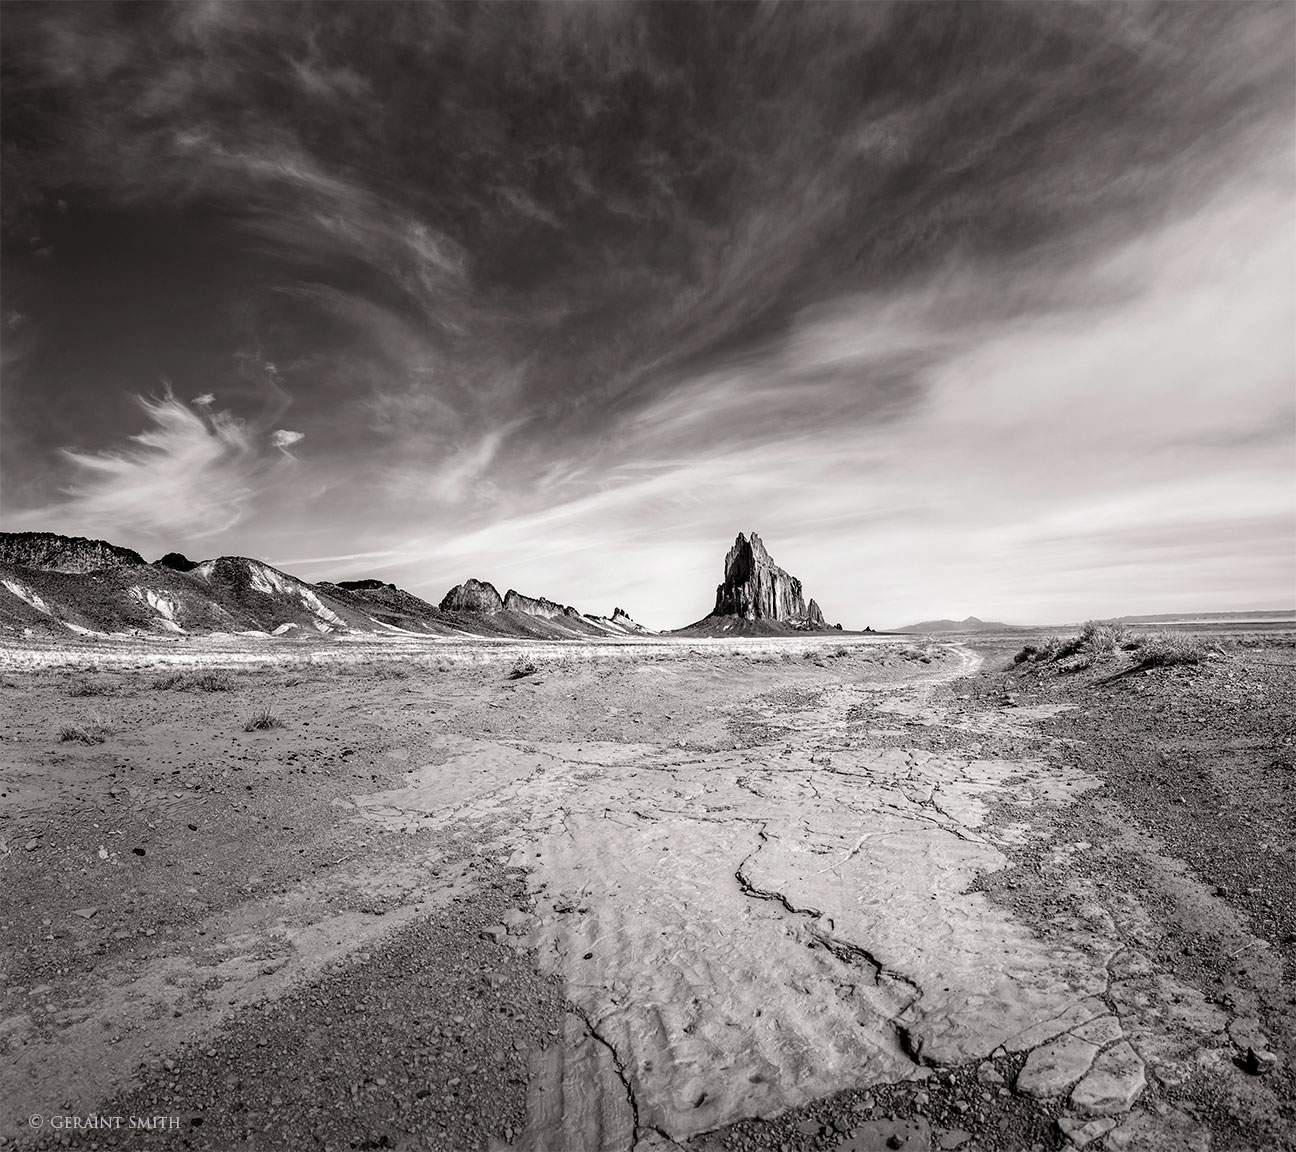 Shiprock "Rock with Wings"